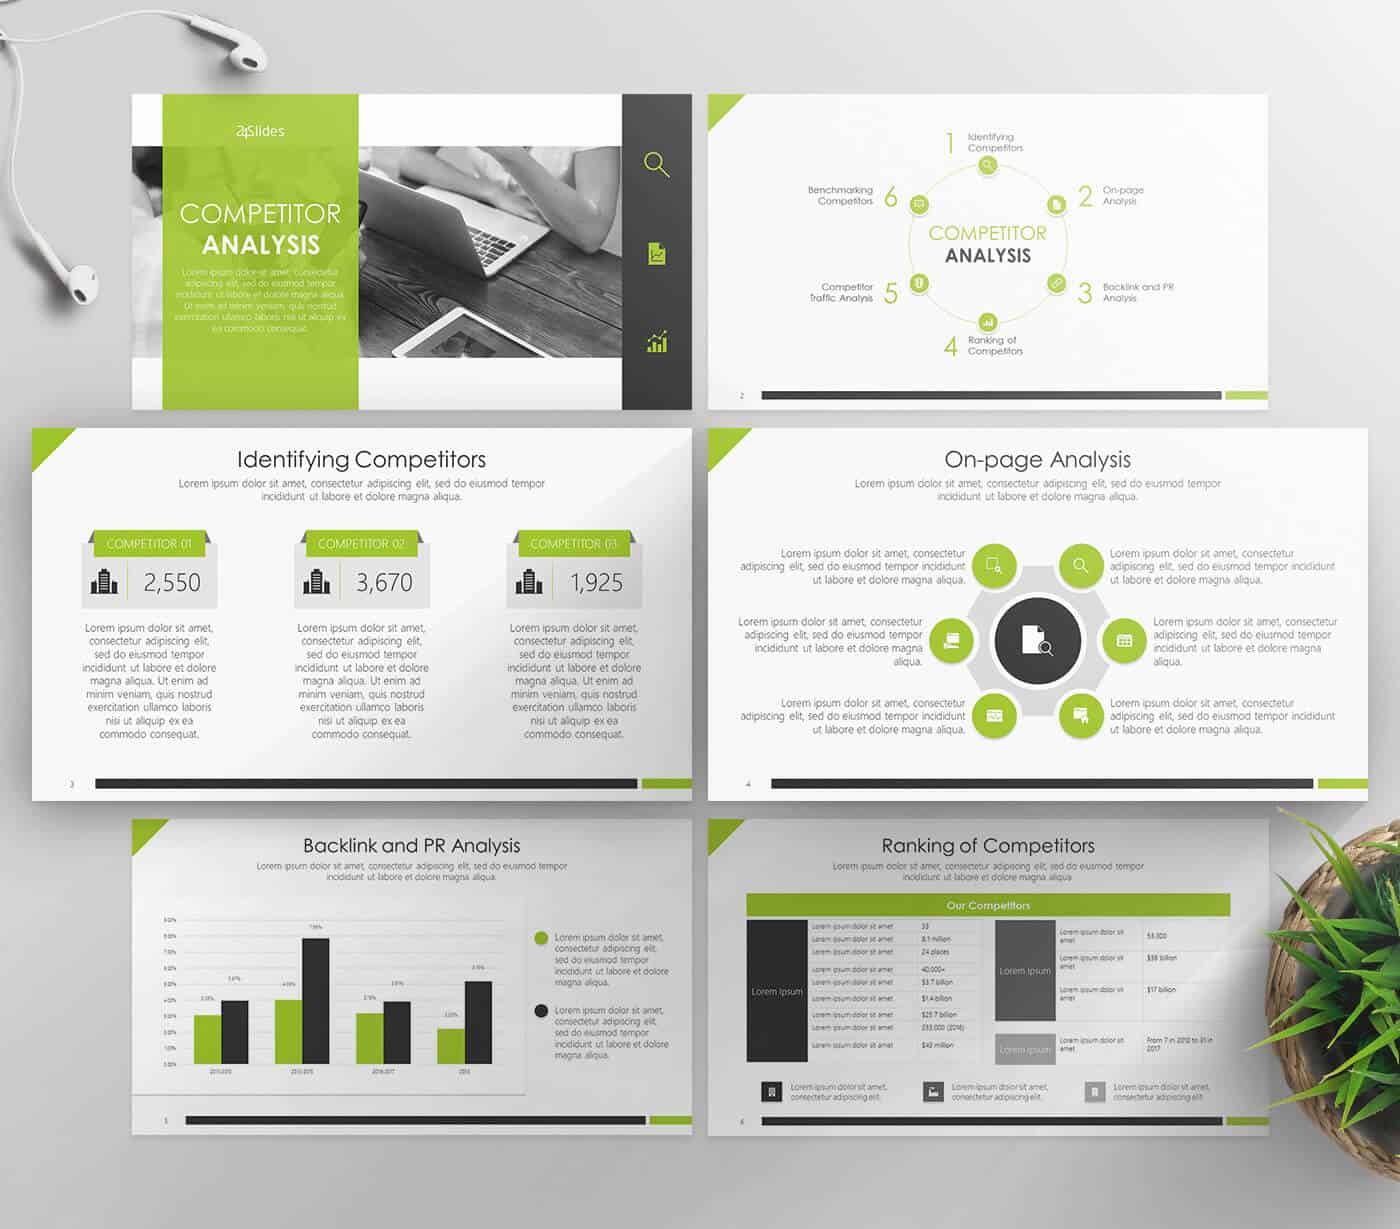 Top 20 Free Templates For Corporate And Business Presentations - Competitor PowerPoint Template Pack by 24Slides